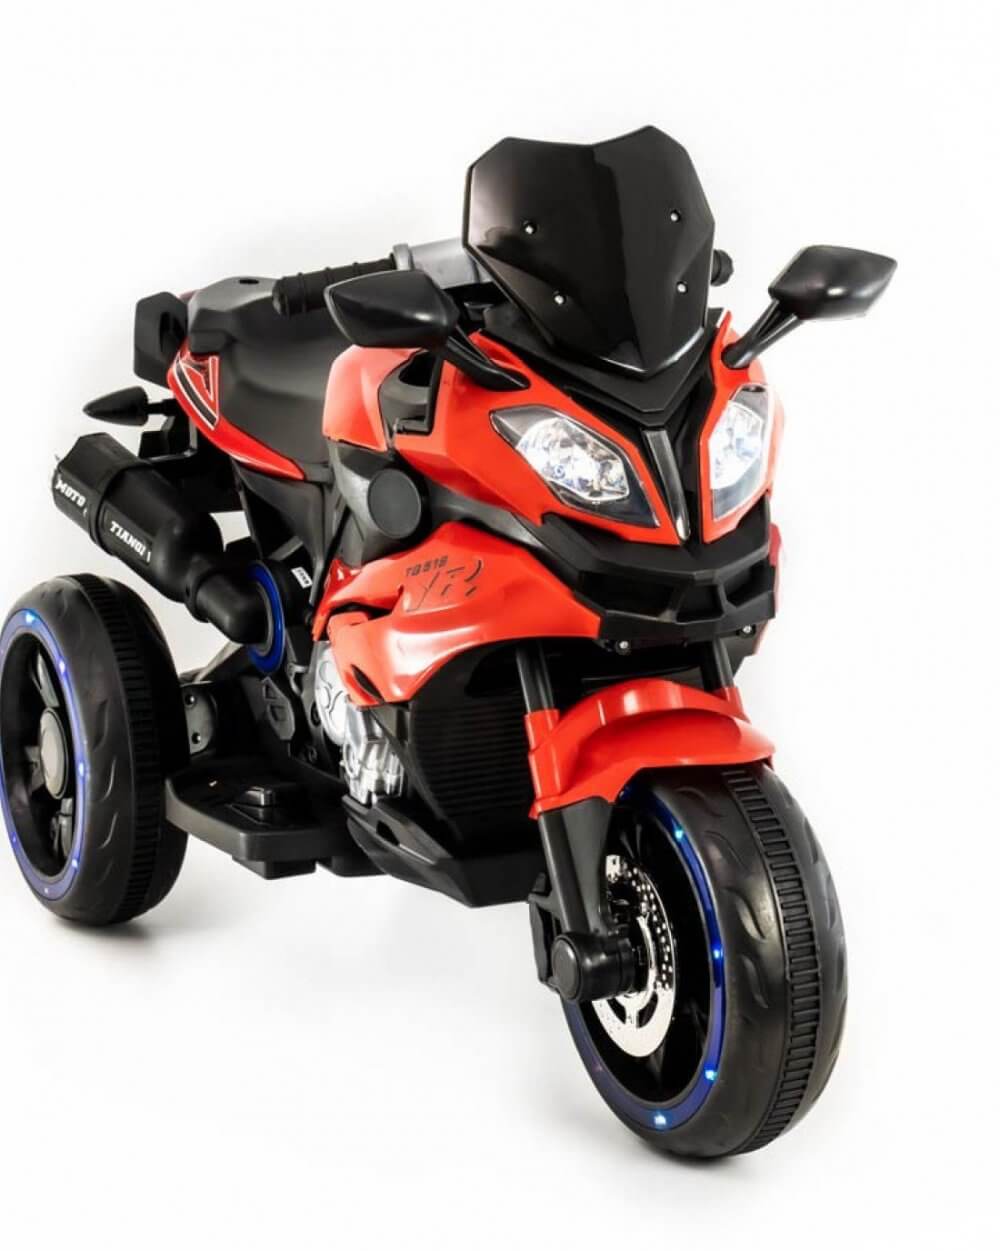 Motorbike BMW inspired 12V ride on cars for kids electric